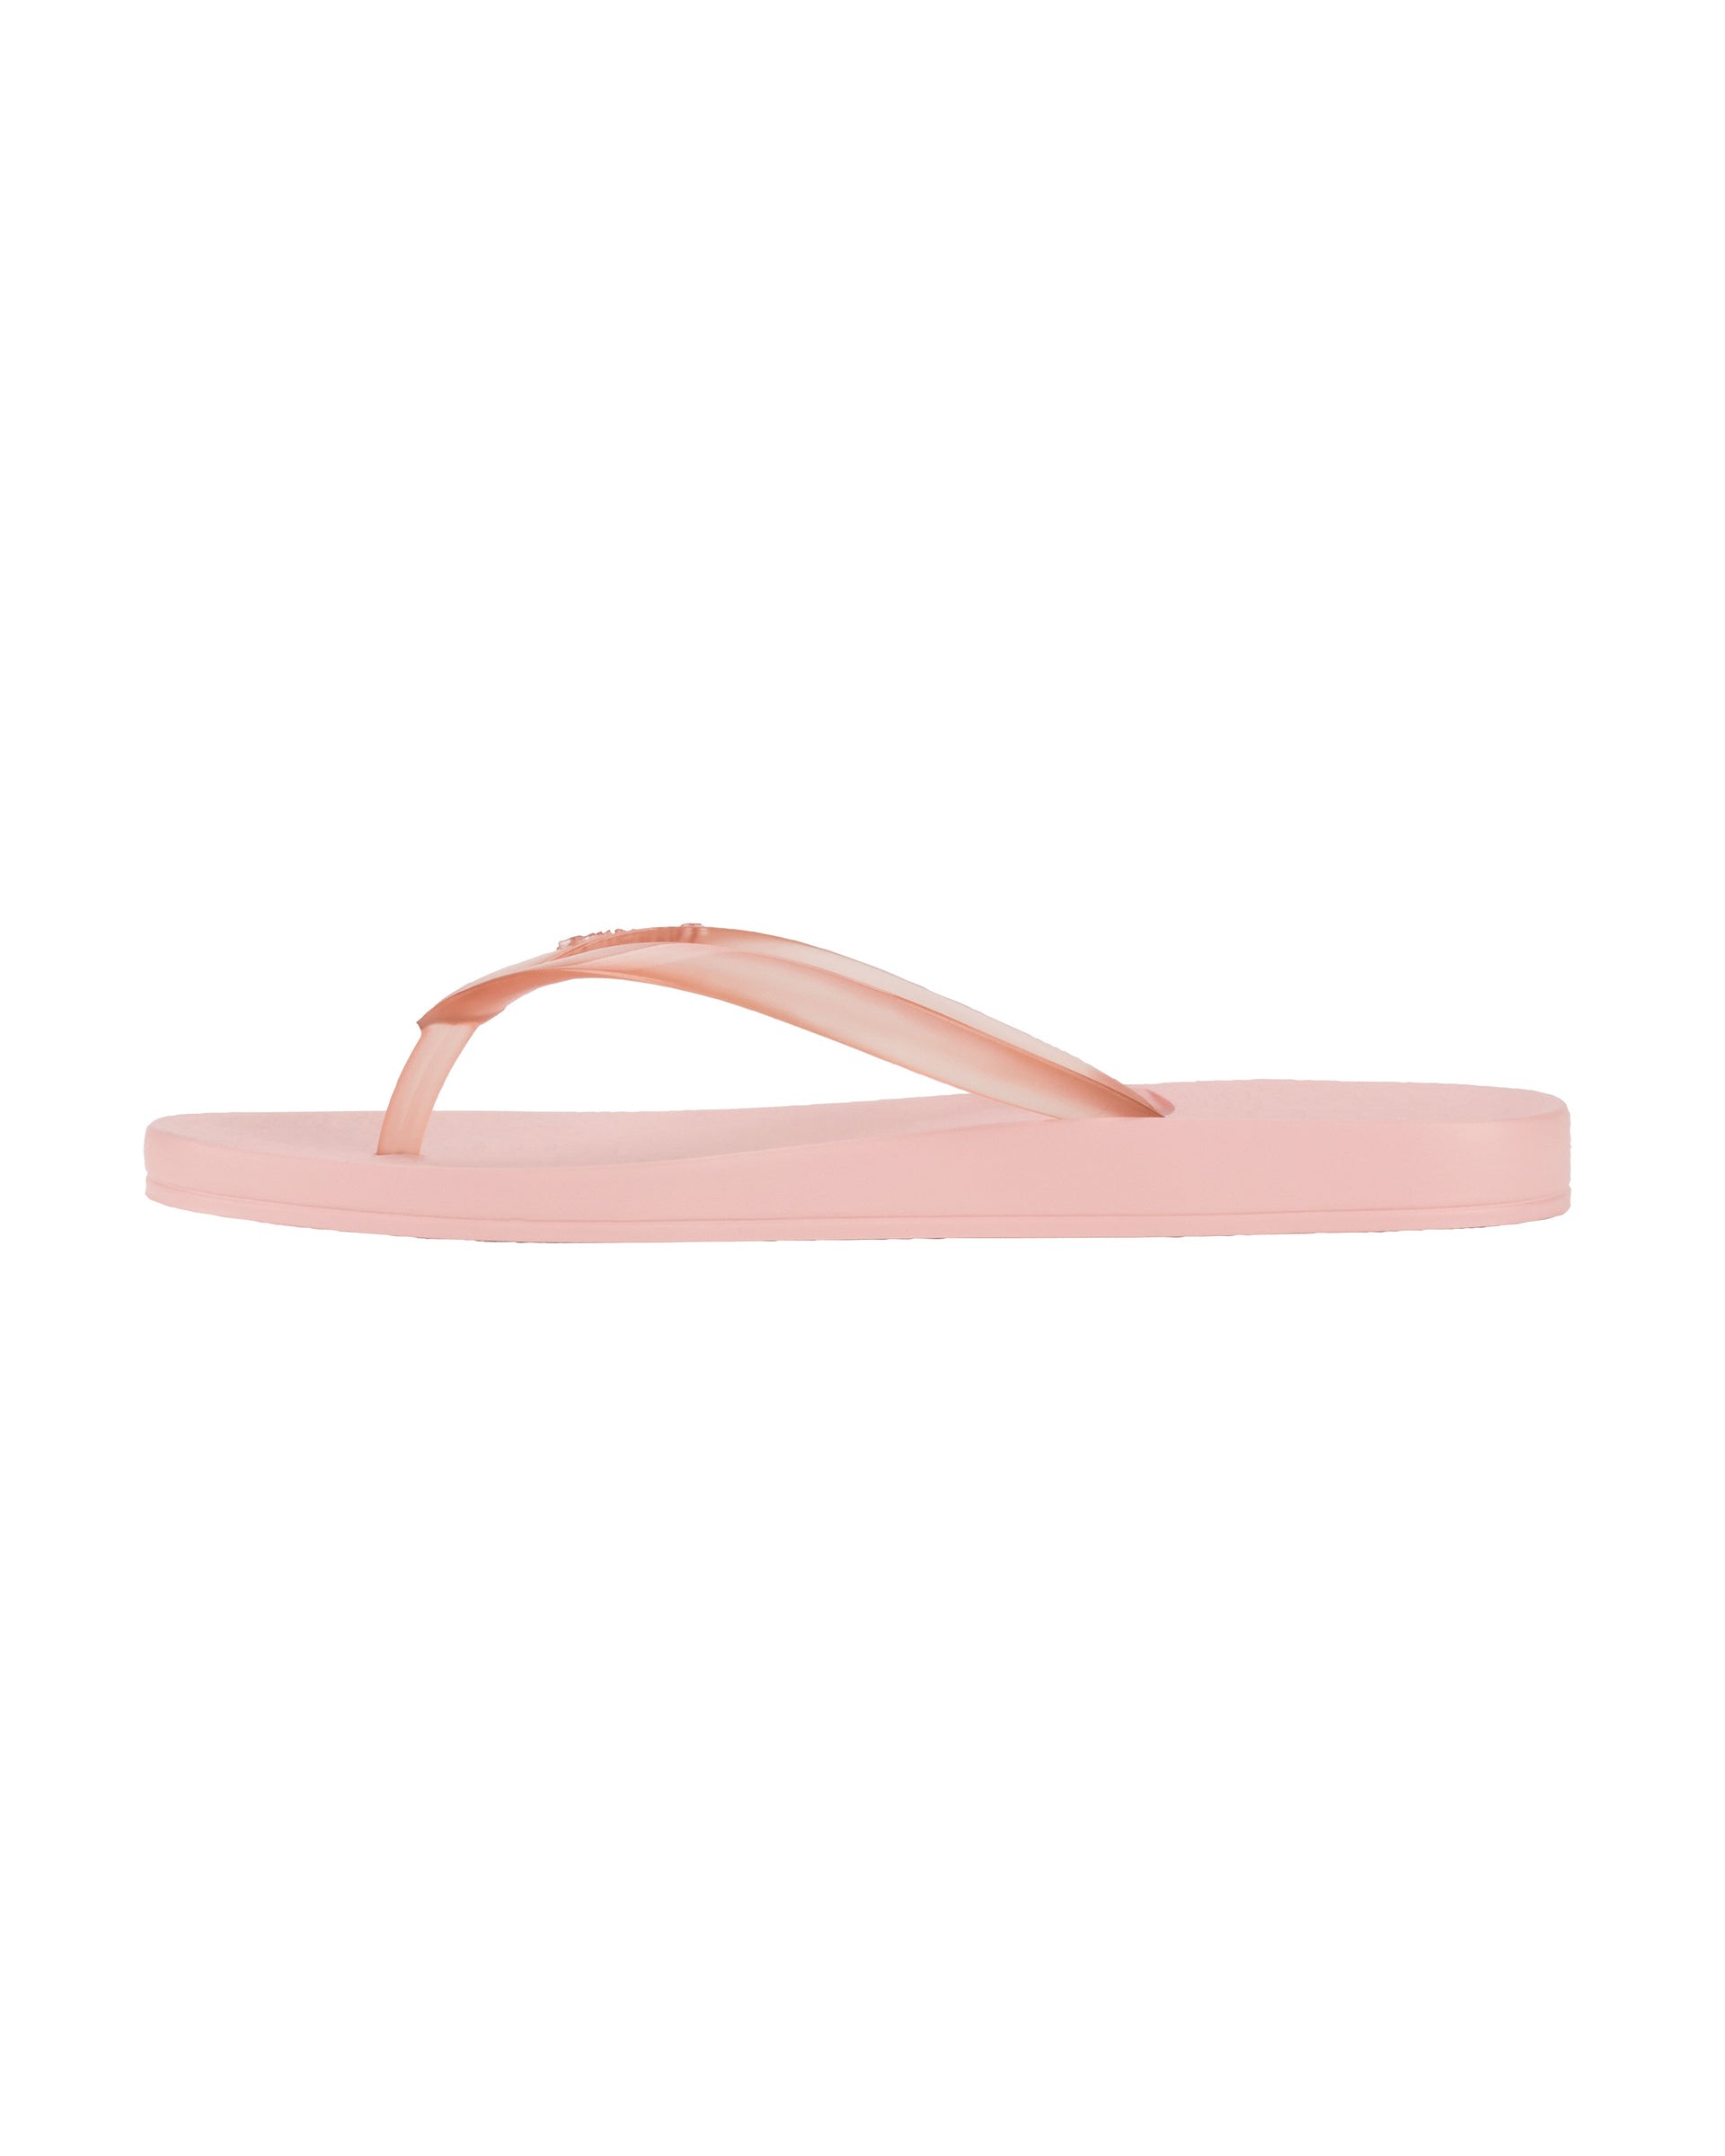 Inner side view of a pink Ipanema Ana Connect women's flip flop with a clear pink strap.